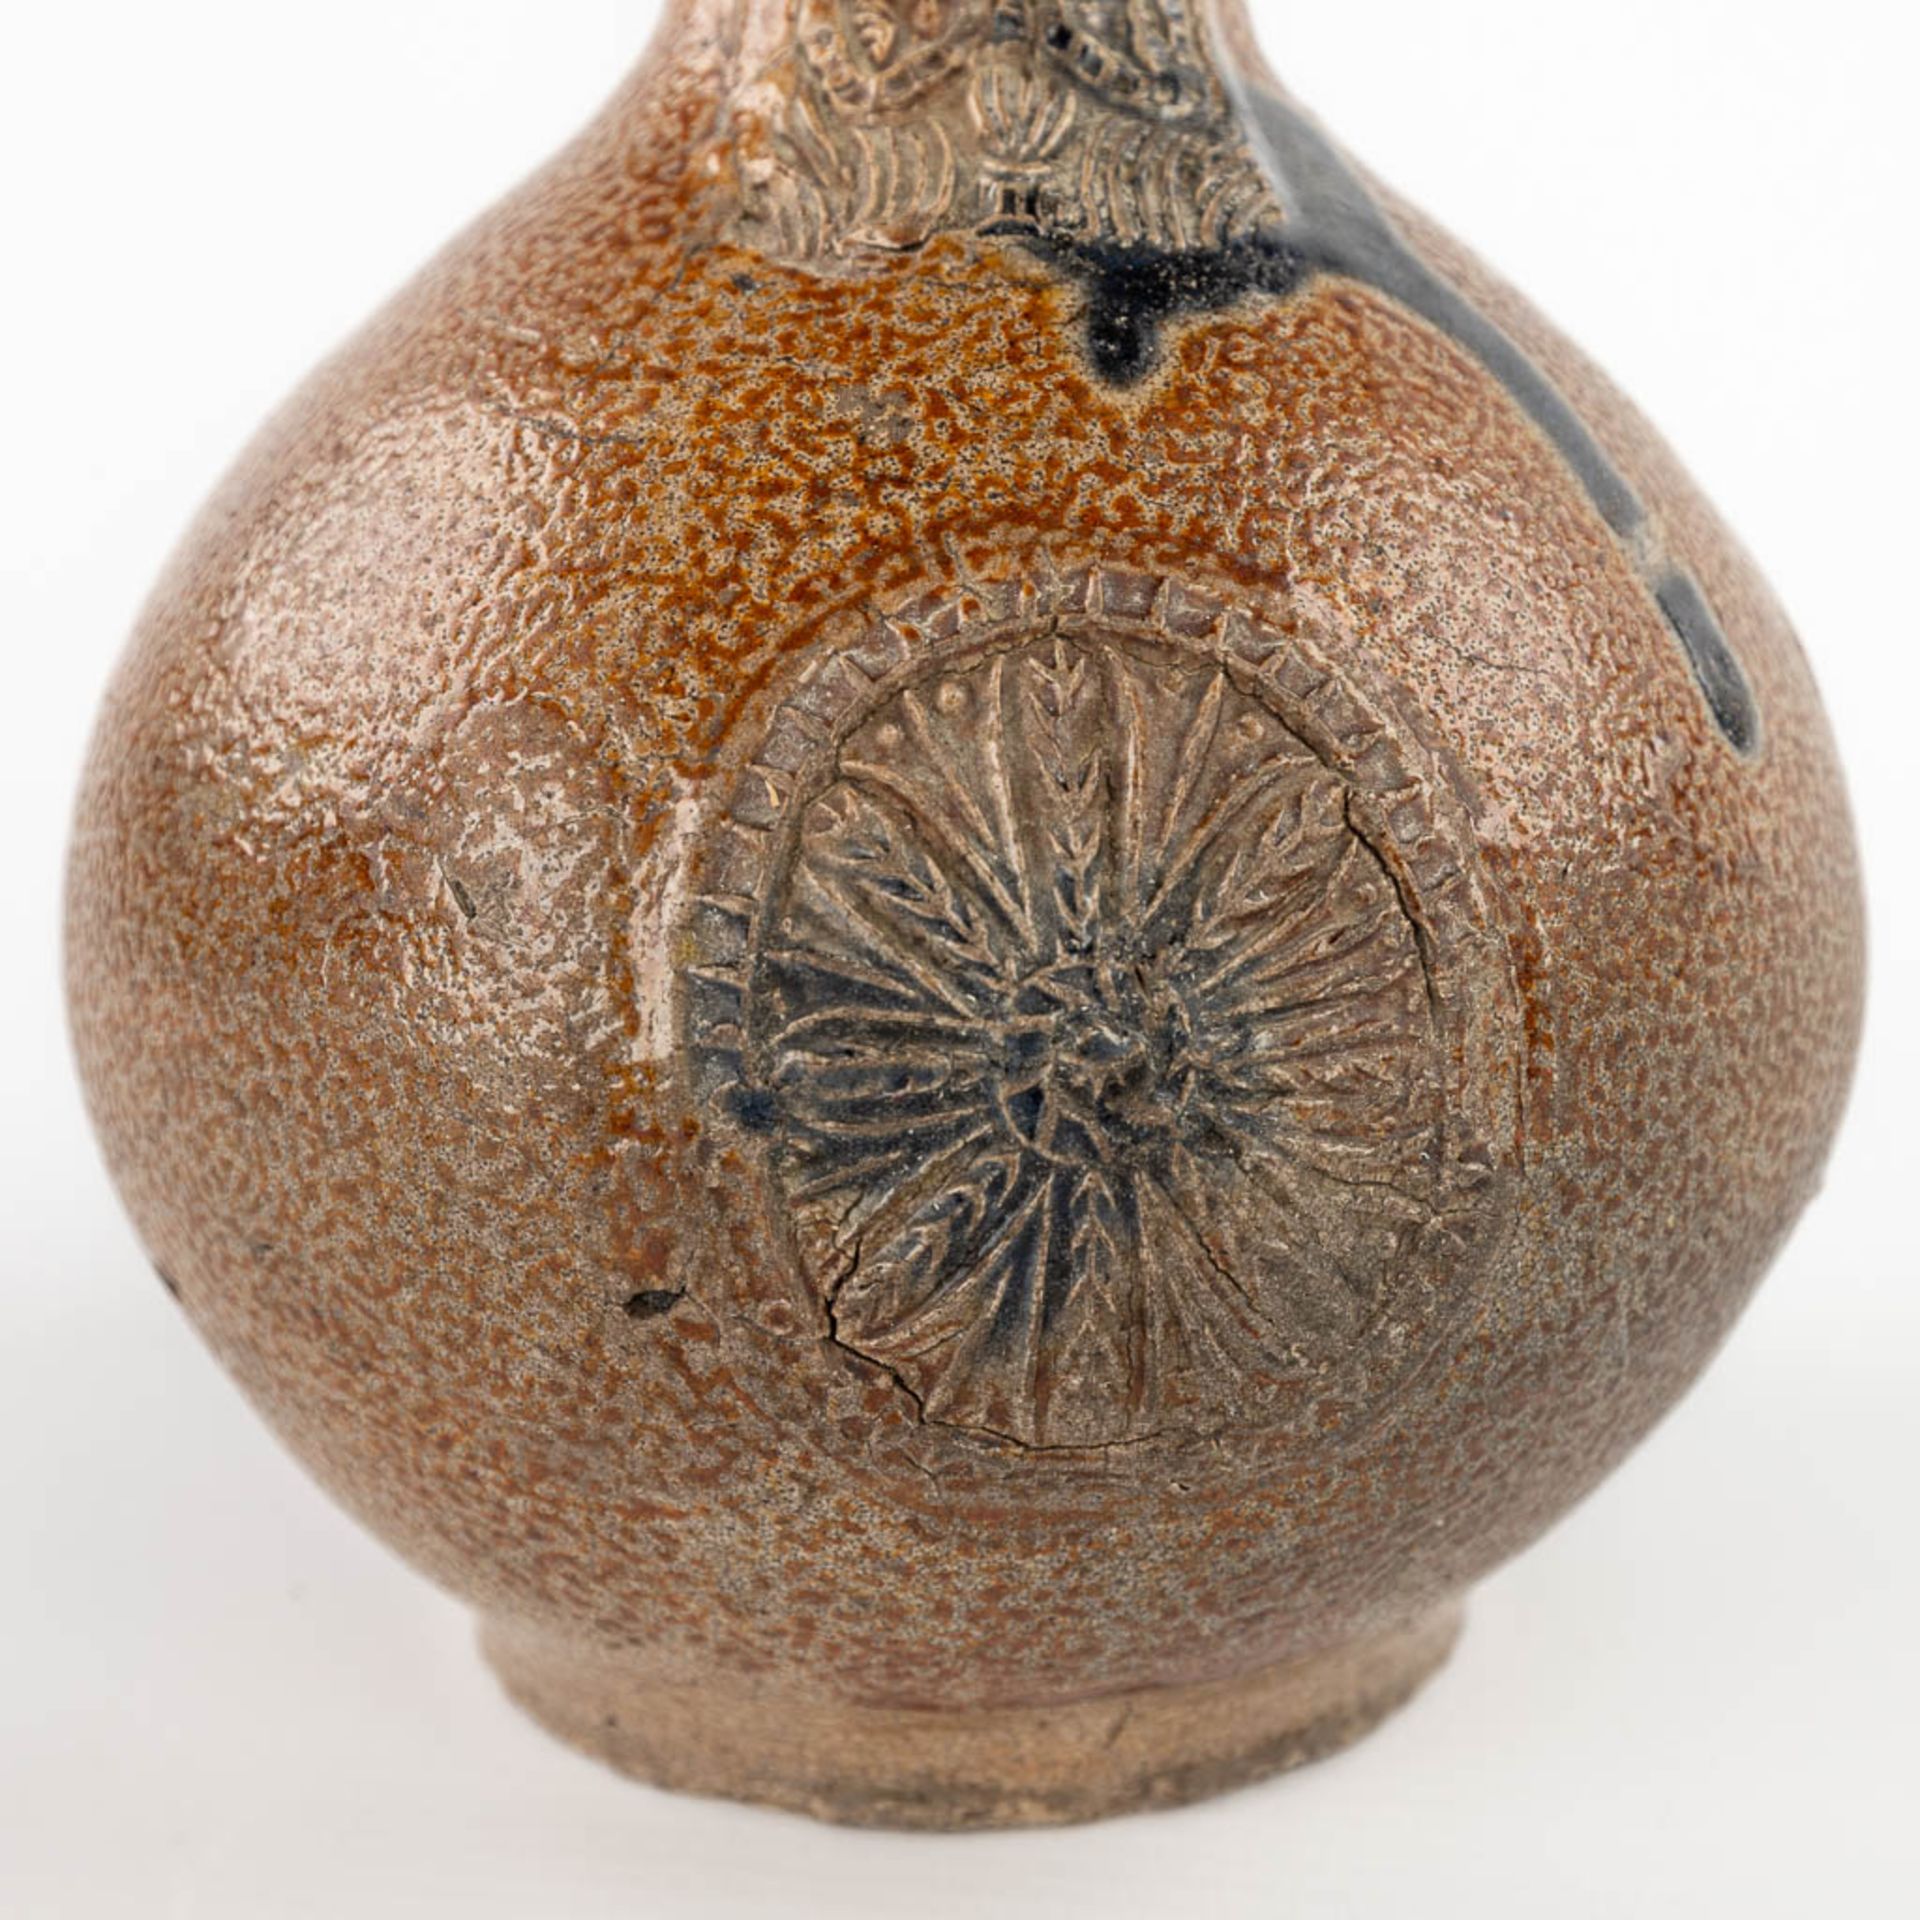 An antique Bartmann jug with 3 cartouches, 17th C. (H:20 x D:14,5 cm) - Image 11 of 14